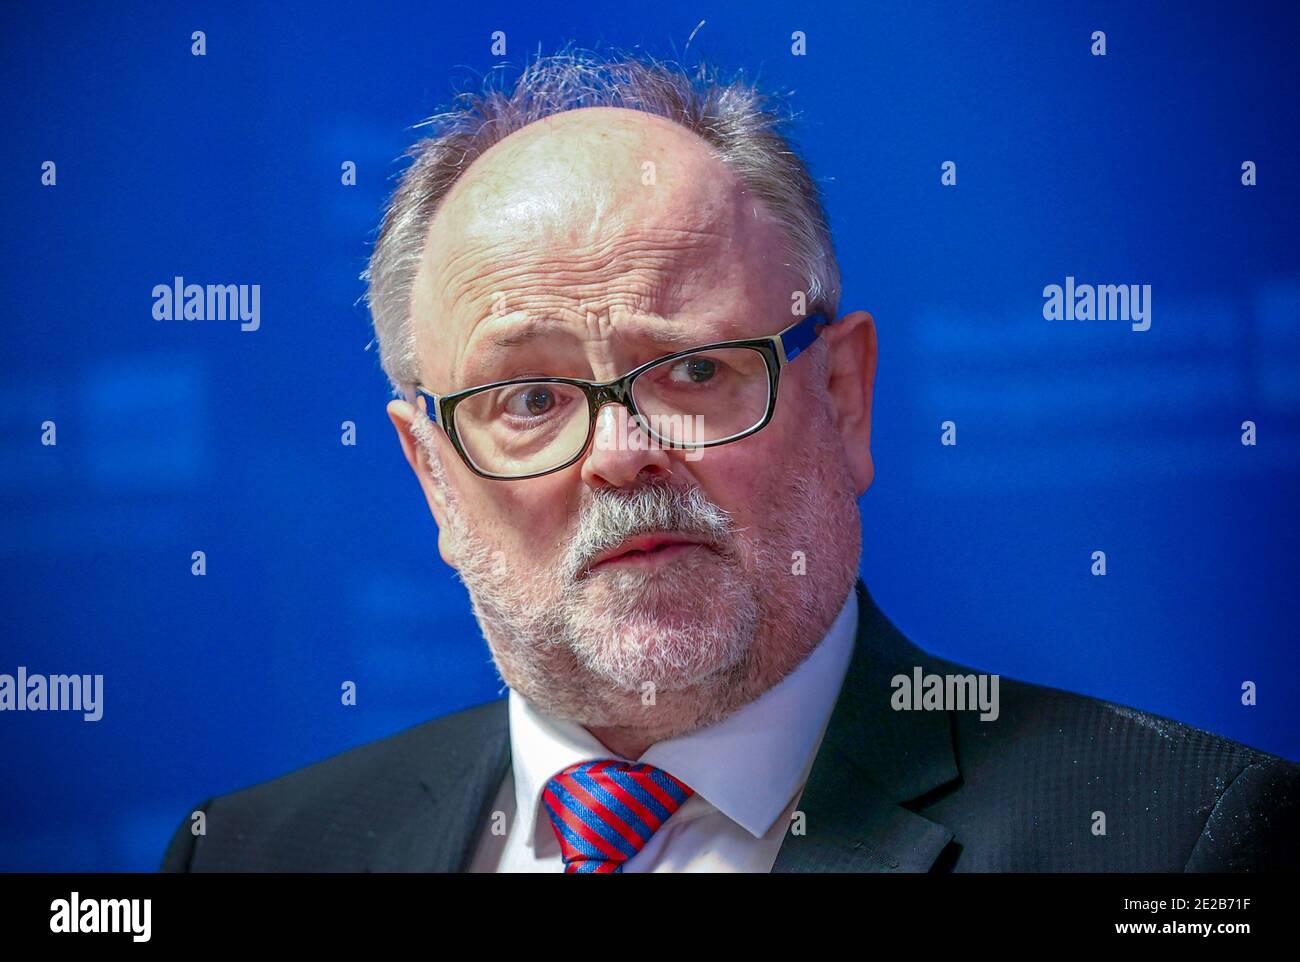 Schwerin, Germany. 12th Nov, 2020. Reinhard Müller, Head of the Department for the Protection of the Constitution, at the Ministry of the Interior of Mecklenburg-Western Pomerania at a press conference to present the 2019 report on the protection of the constitution. Mecklenburg-Western Pomerania's Interior Minister Renz has dismissed the head of the State Office for the Protection of the Constitution, Müller. With this, the minister drew the first personnel consequences from the agency's actions in connection with information on the Berlin Christmas market atta Credit: dpa/Alamy Live News Stock Photo